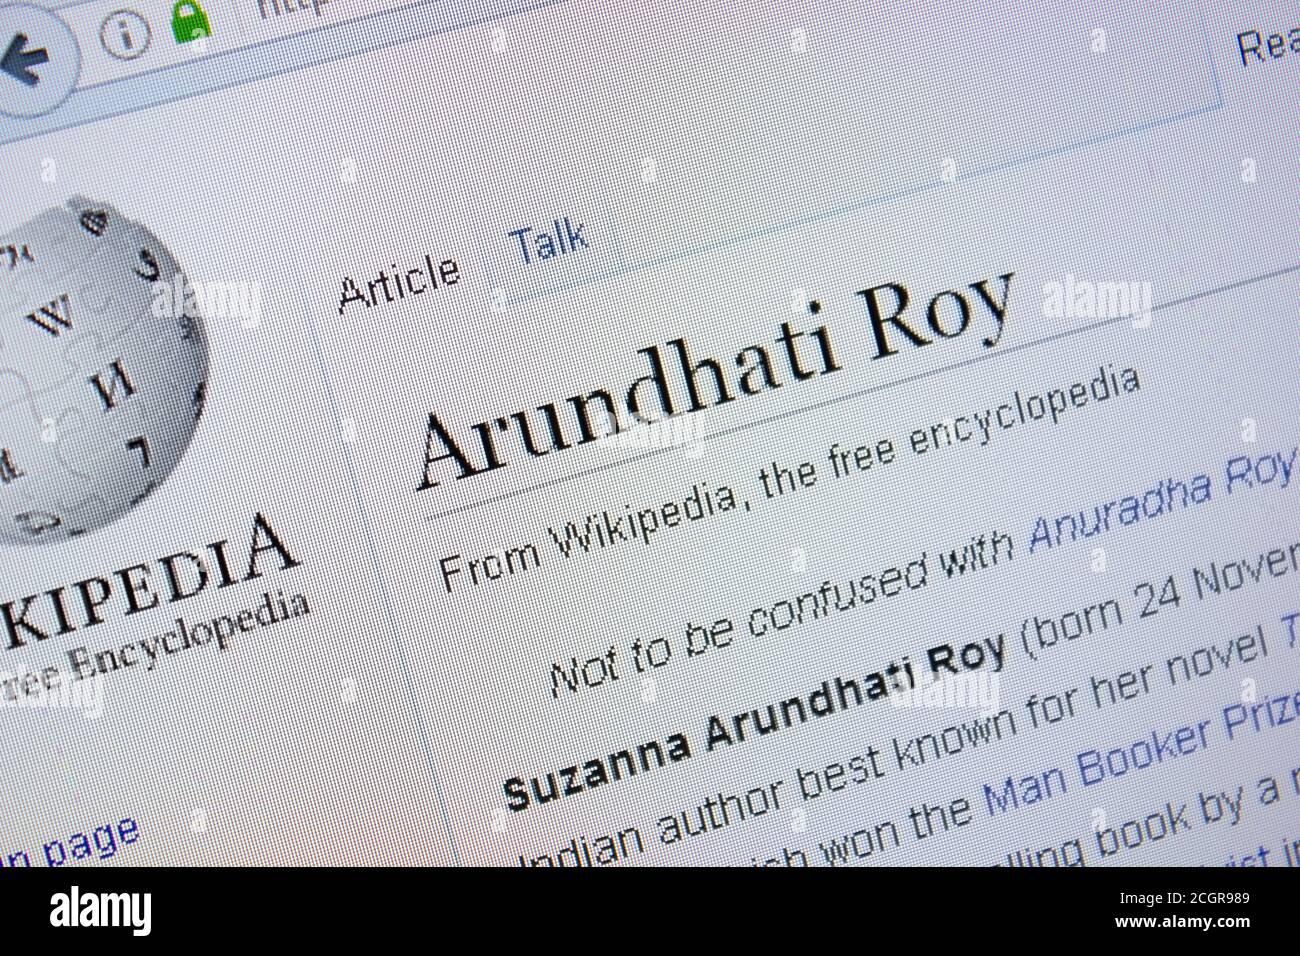 Ryazan, Russia - September 09, 2018 - Wikipedia page about Arundhati Roy on a display of PC Stock Photo